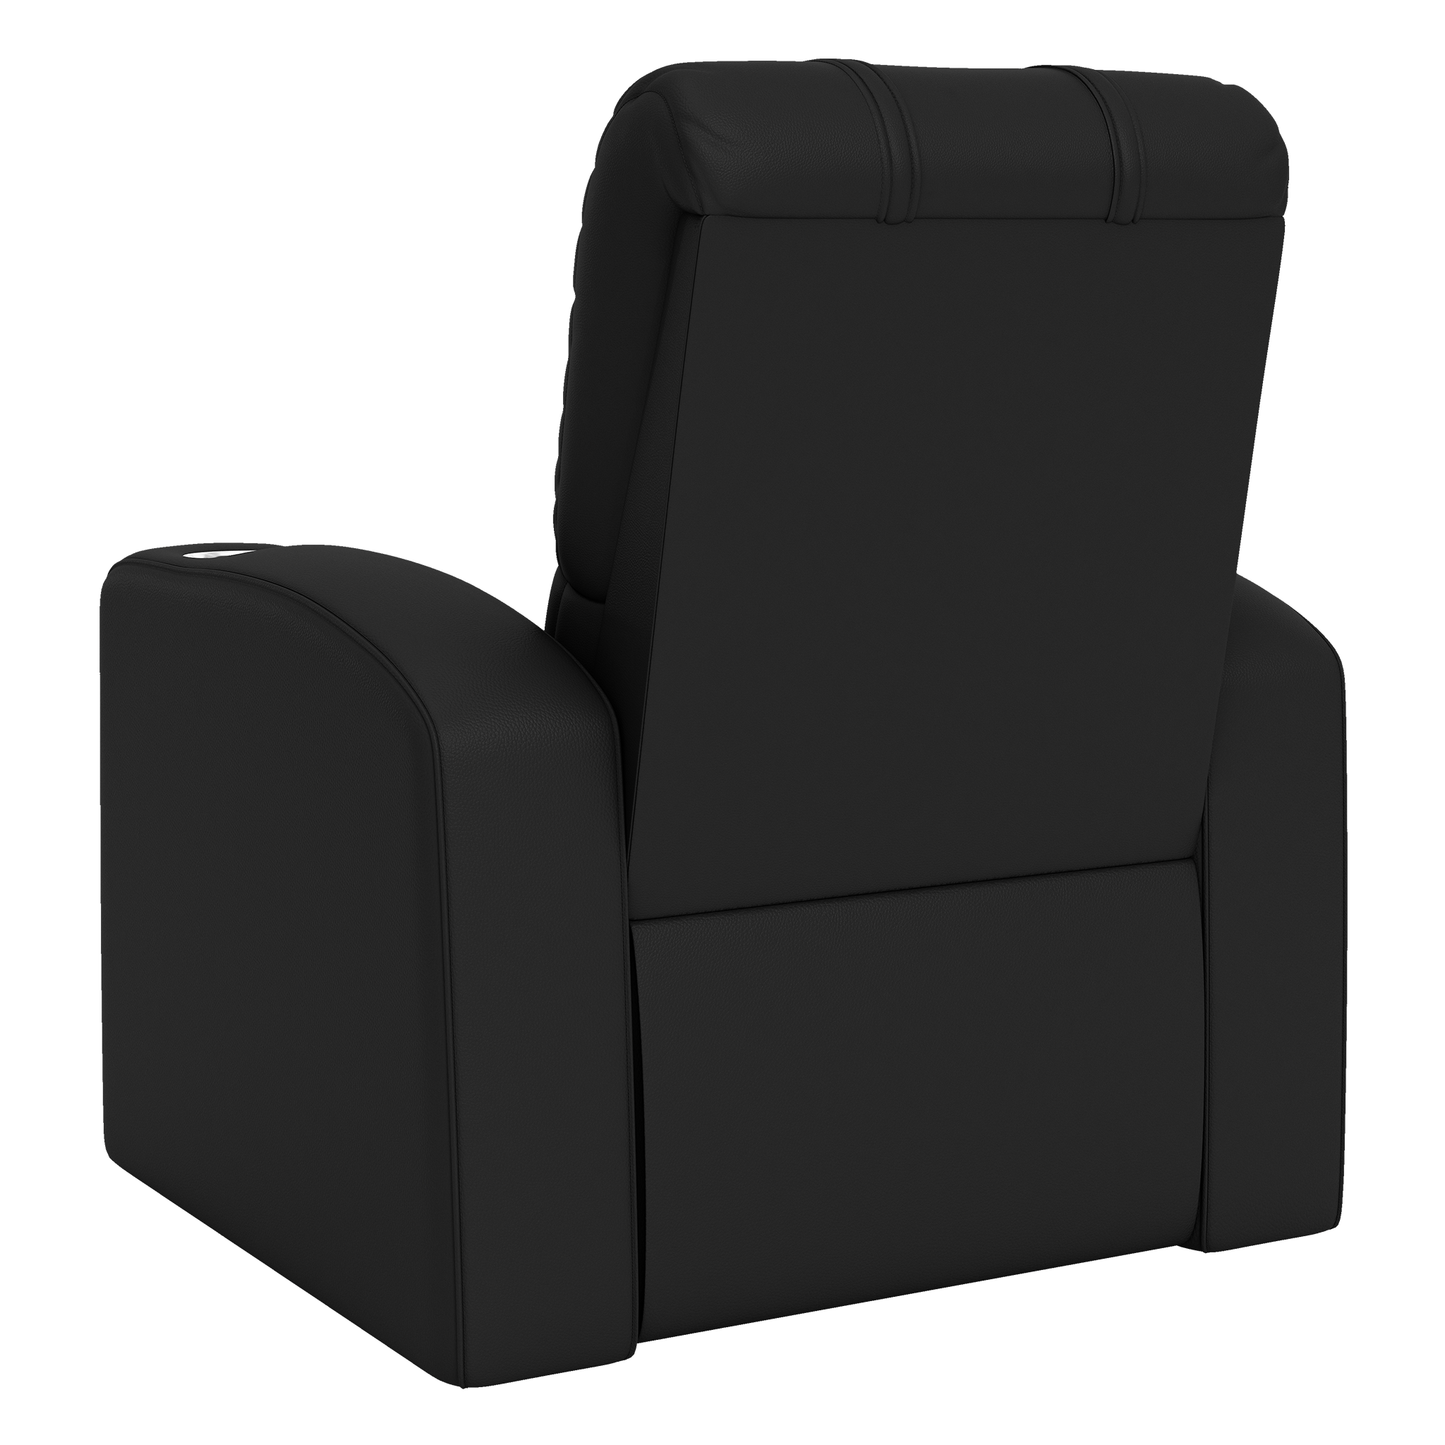 Relax Home Theater Recliner with Detroit Lions Classic Logo